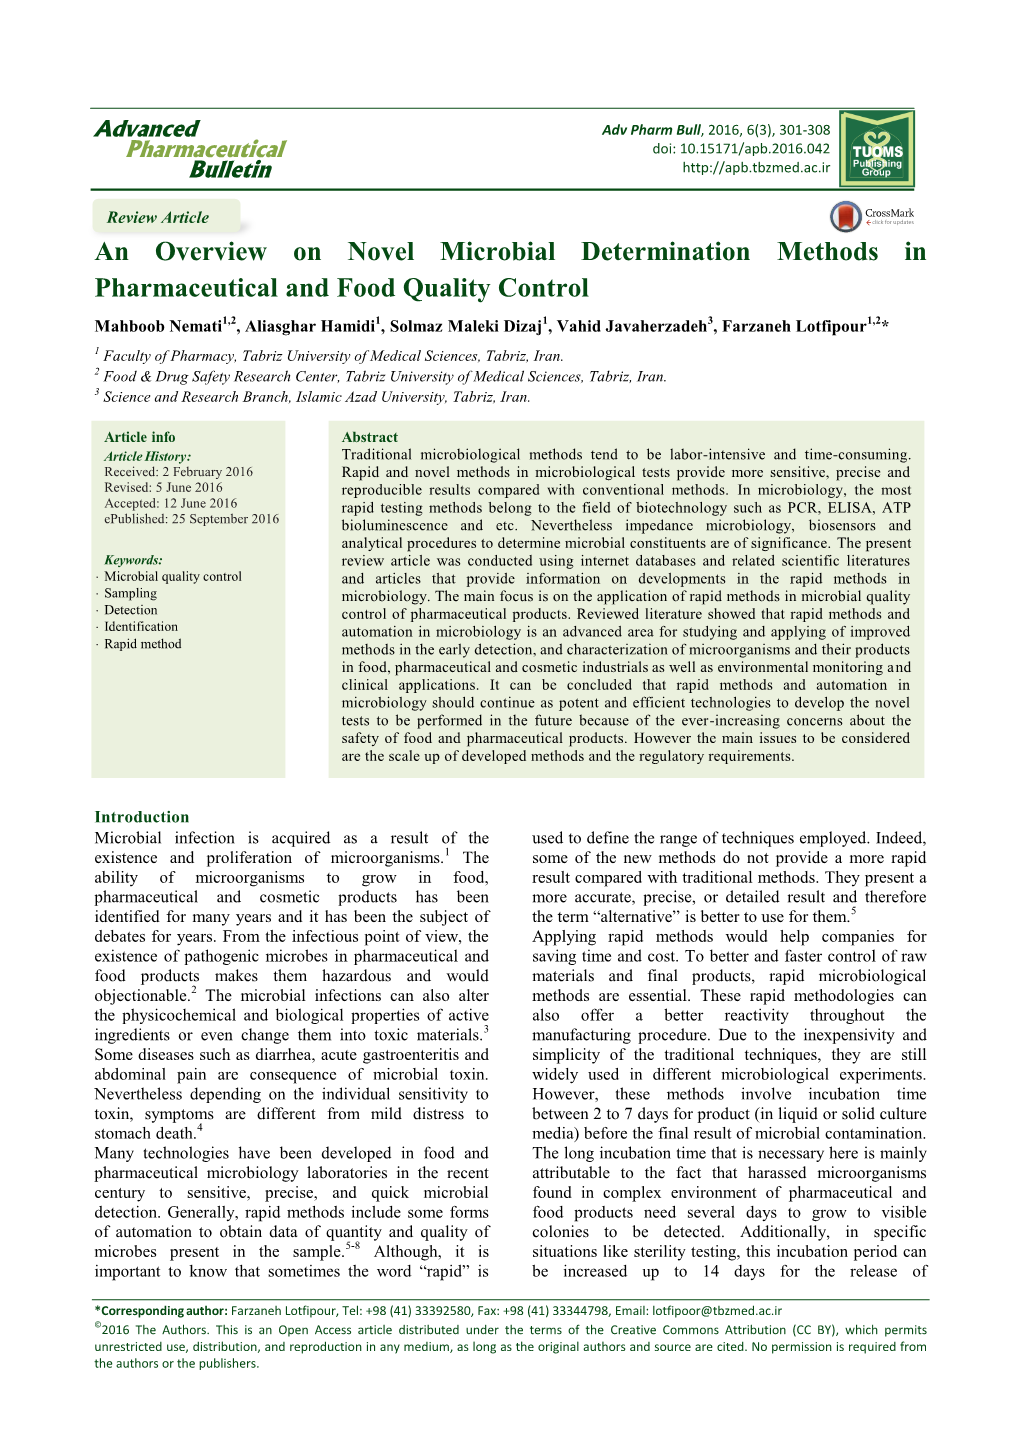 An Overview on Novel Microbial Determination Methods in Pharmaceutical and Food Quality Control